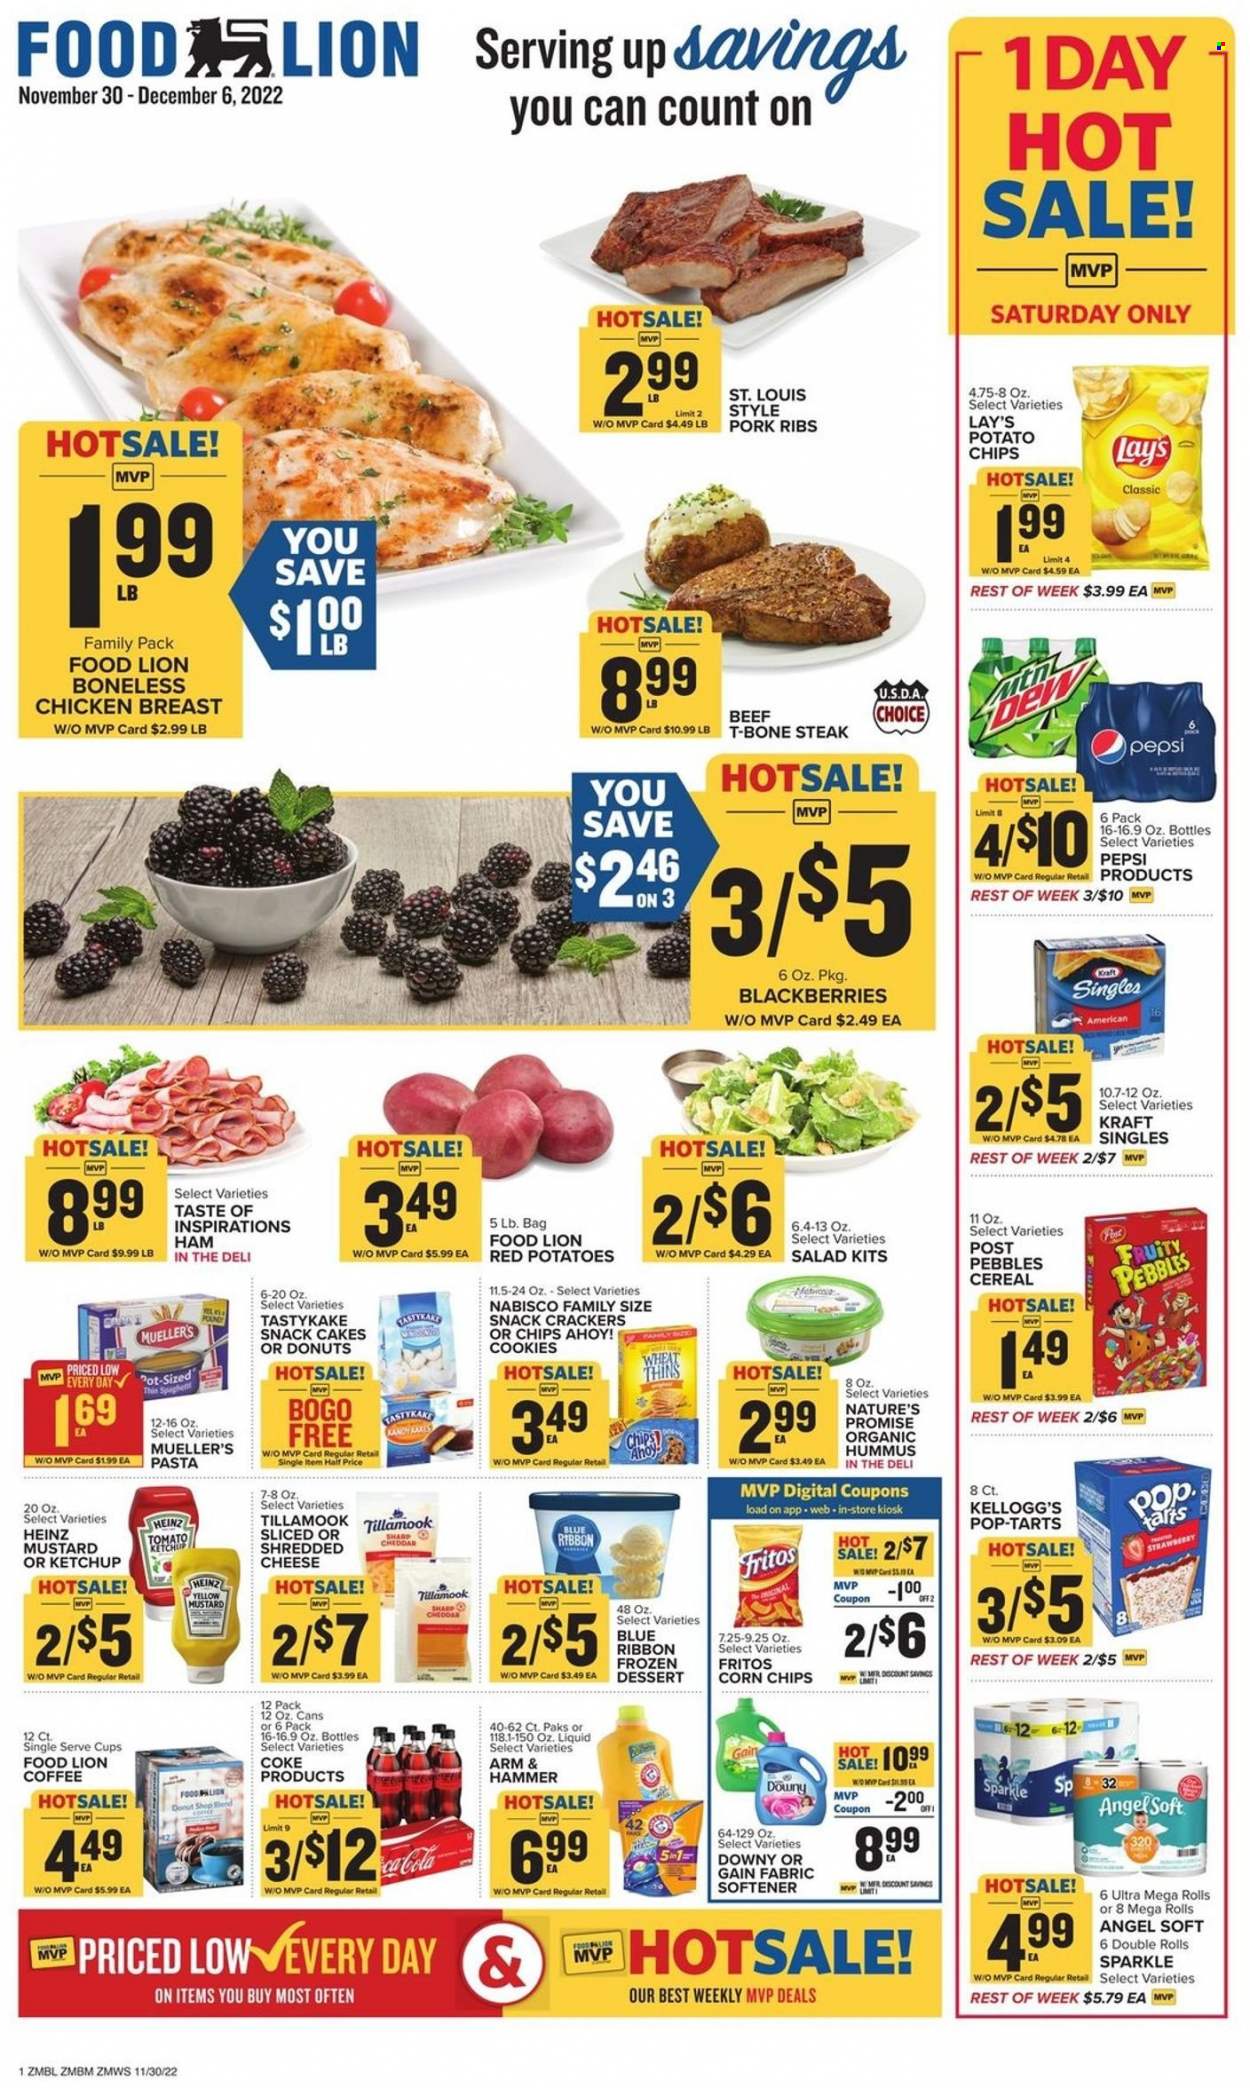 thumbnail - Food Lion Flyer - 11/30/2022 - 12/06/2022 - Sales products - Blue Ribbon, Nature’s Promise, donut, salad, red potatoes, blackberries, pasta, Kraft®, ham, hummus, sandwich slices, shredded cheese, Kraft Singles, cookies, snack, crackers, Pop-Tarts, Chips Ahoy!, Fritos, potato chips, Lay’s, Thins, corn chips, ARM & HAMMER, Heinz, cereals, Fruity Pebbles, mustard, ketchup, Coca-Cola, Pepsi, coffee, chicken breasts, beef meat, t-bone steak, steak, pork meat, pork ribs, Gain, fabric softener, pot, cup. Page 1.